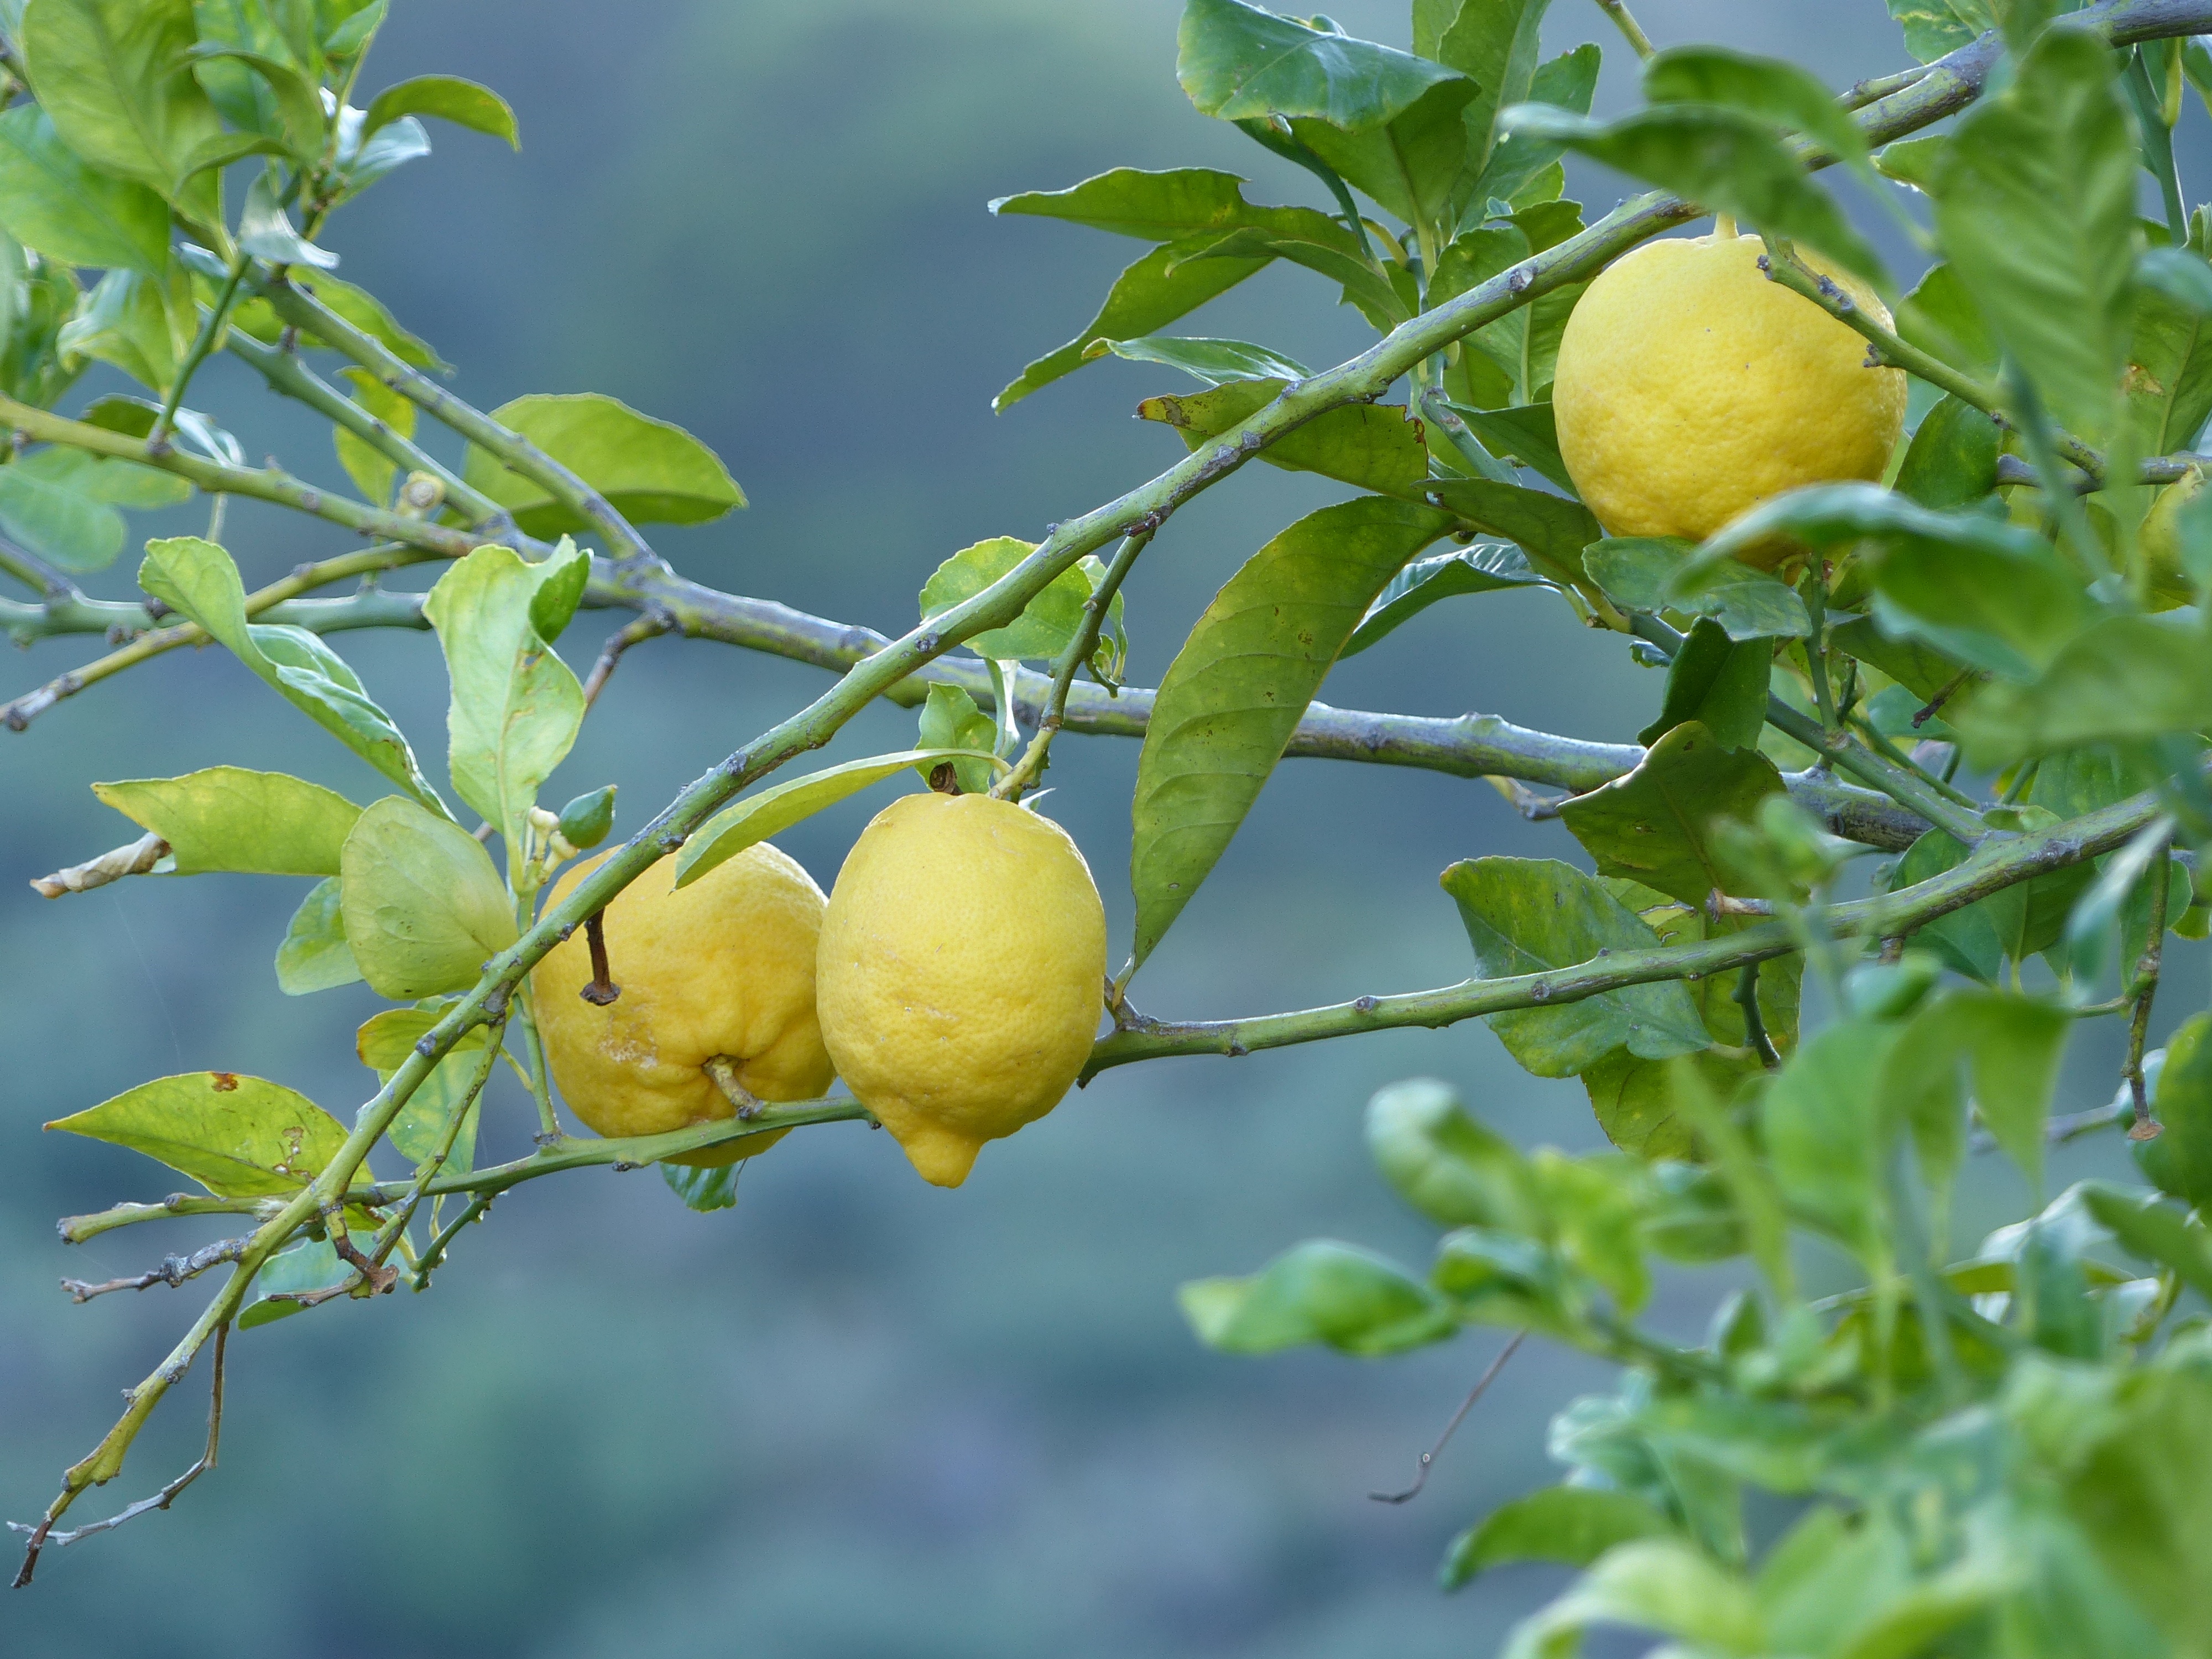 144453 download wallpaper fruits, food, lemons, wood, tree, branch screensavers and pictures for free